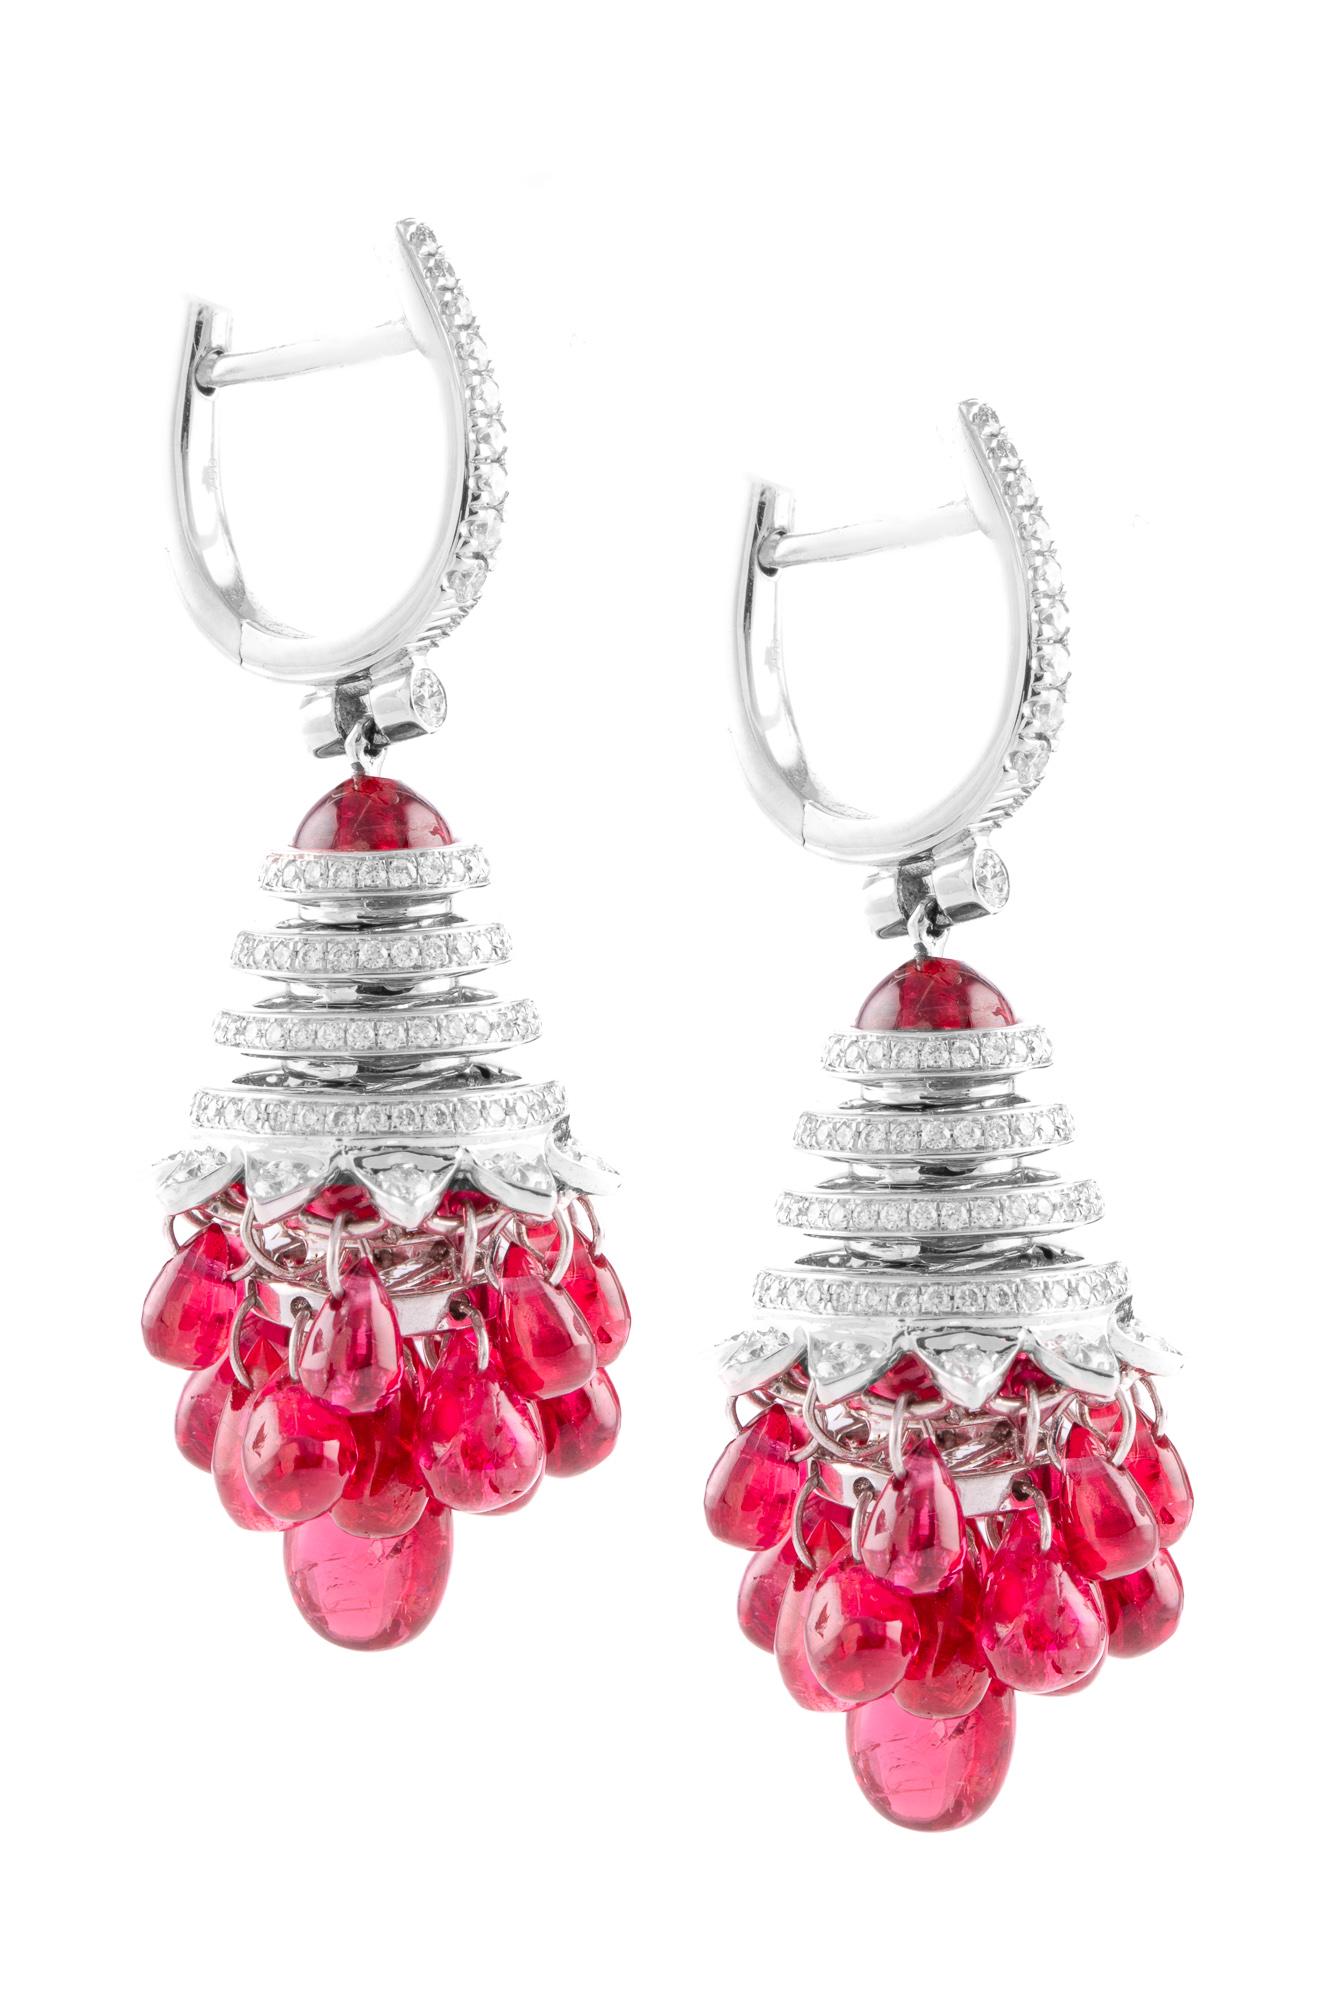 42 individually set spinel beads are carefully and expertly set below a spiral diamond setting in these stunning, hand-crafted earrings in 18 karat white gold.

Each spinel bead moves individually, resulting in a fluid design that sways with every